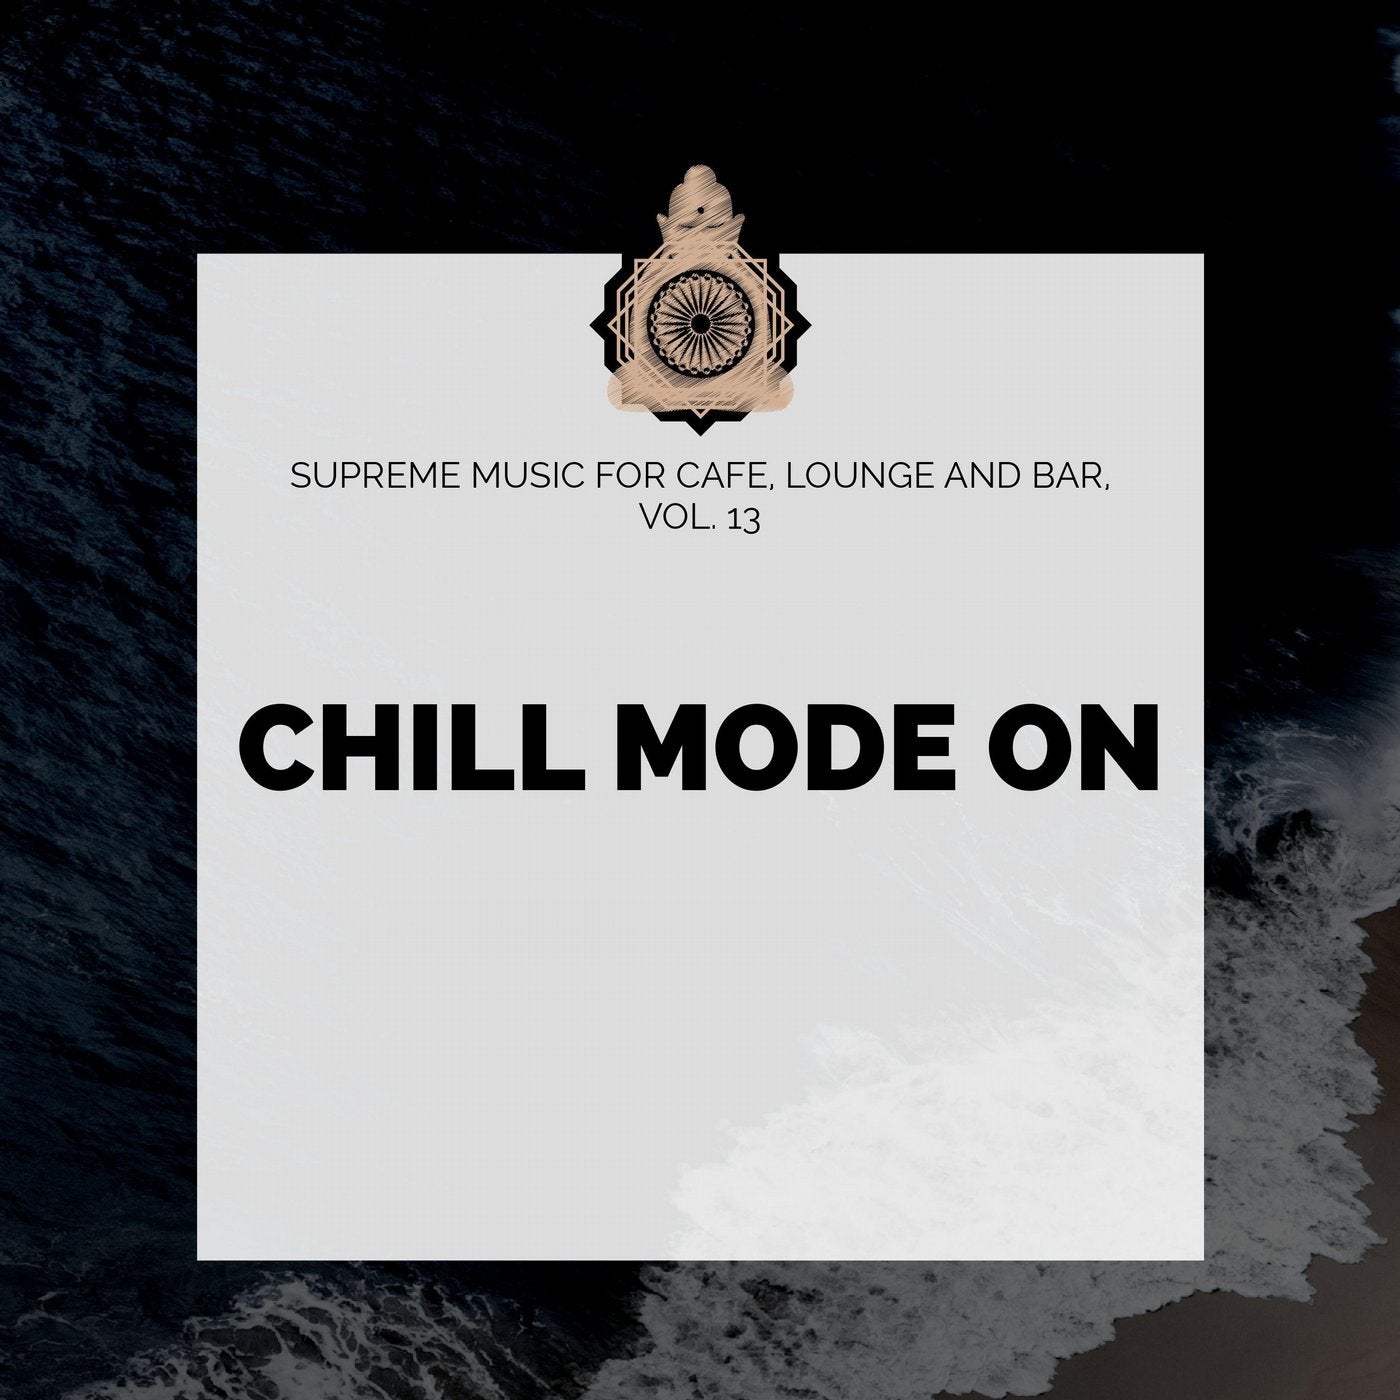 Chill Mode On - Supreme Music For Cafe, Lounge And Bar, Vol. 13